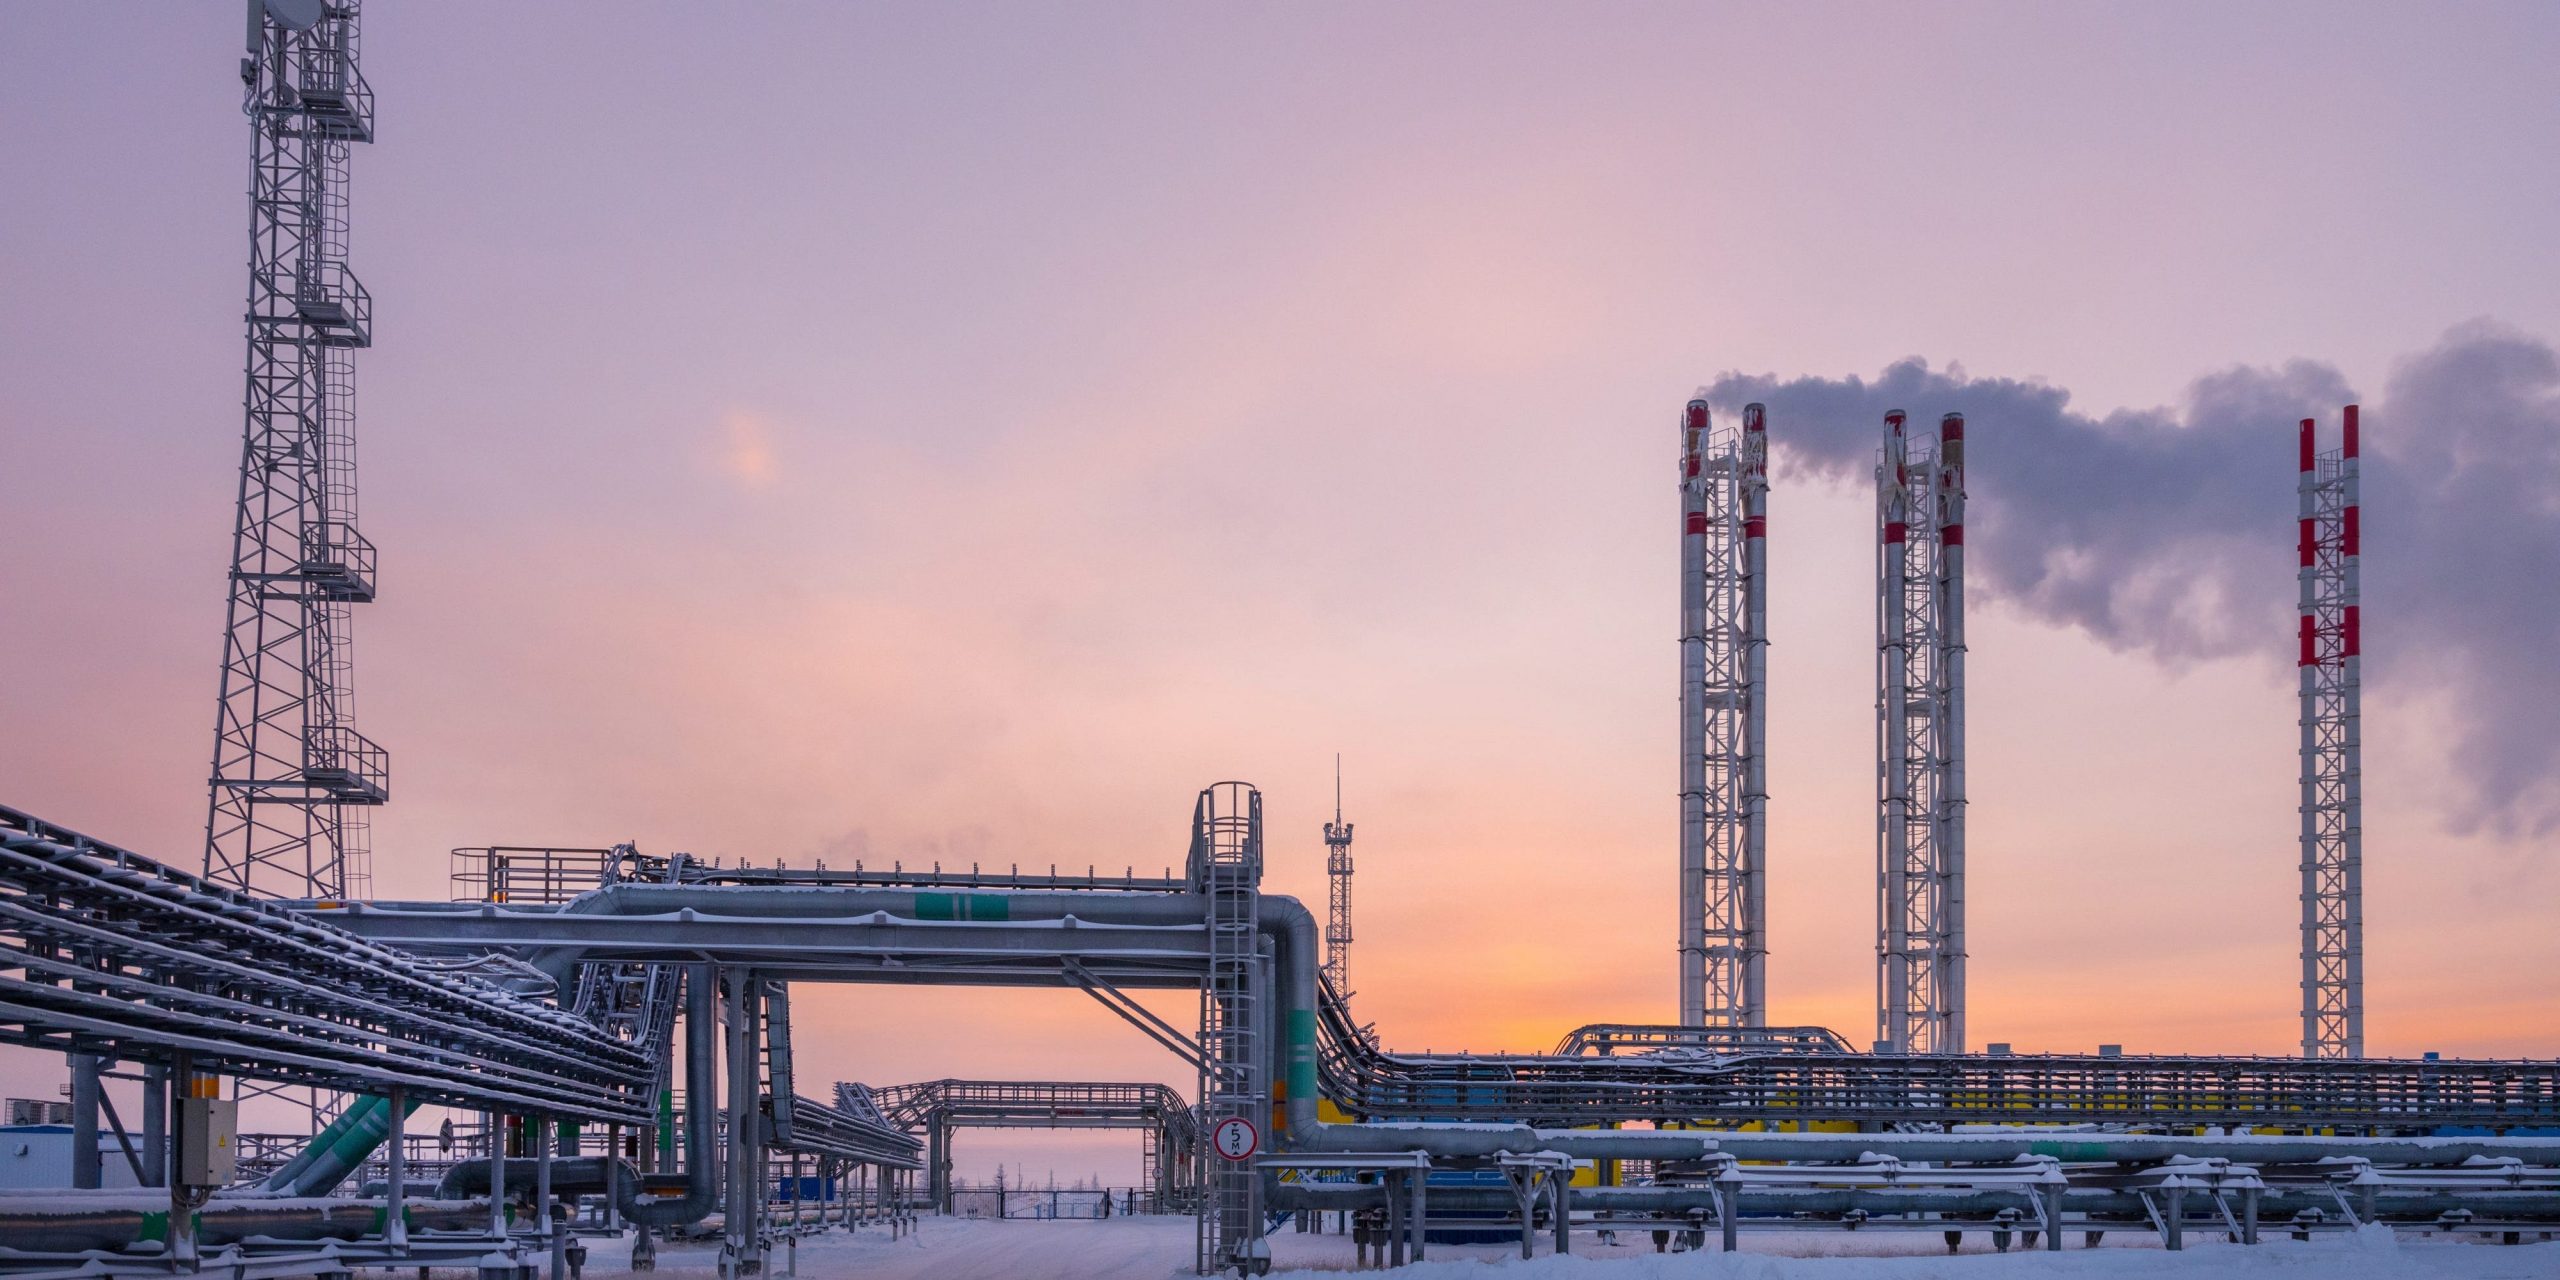 Natural gas production and processing in Russia